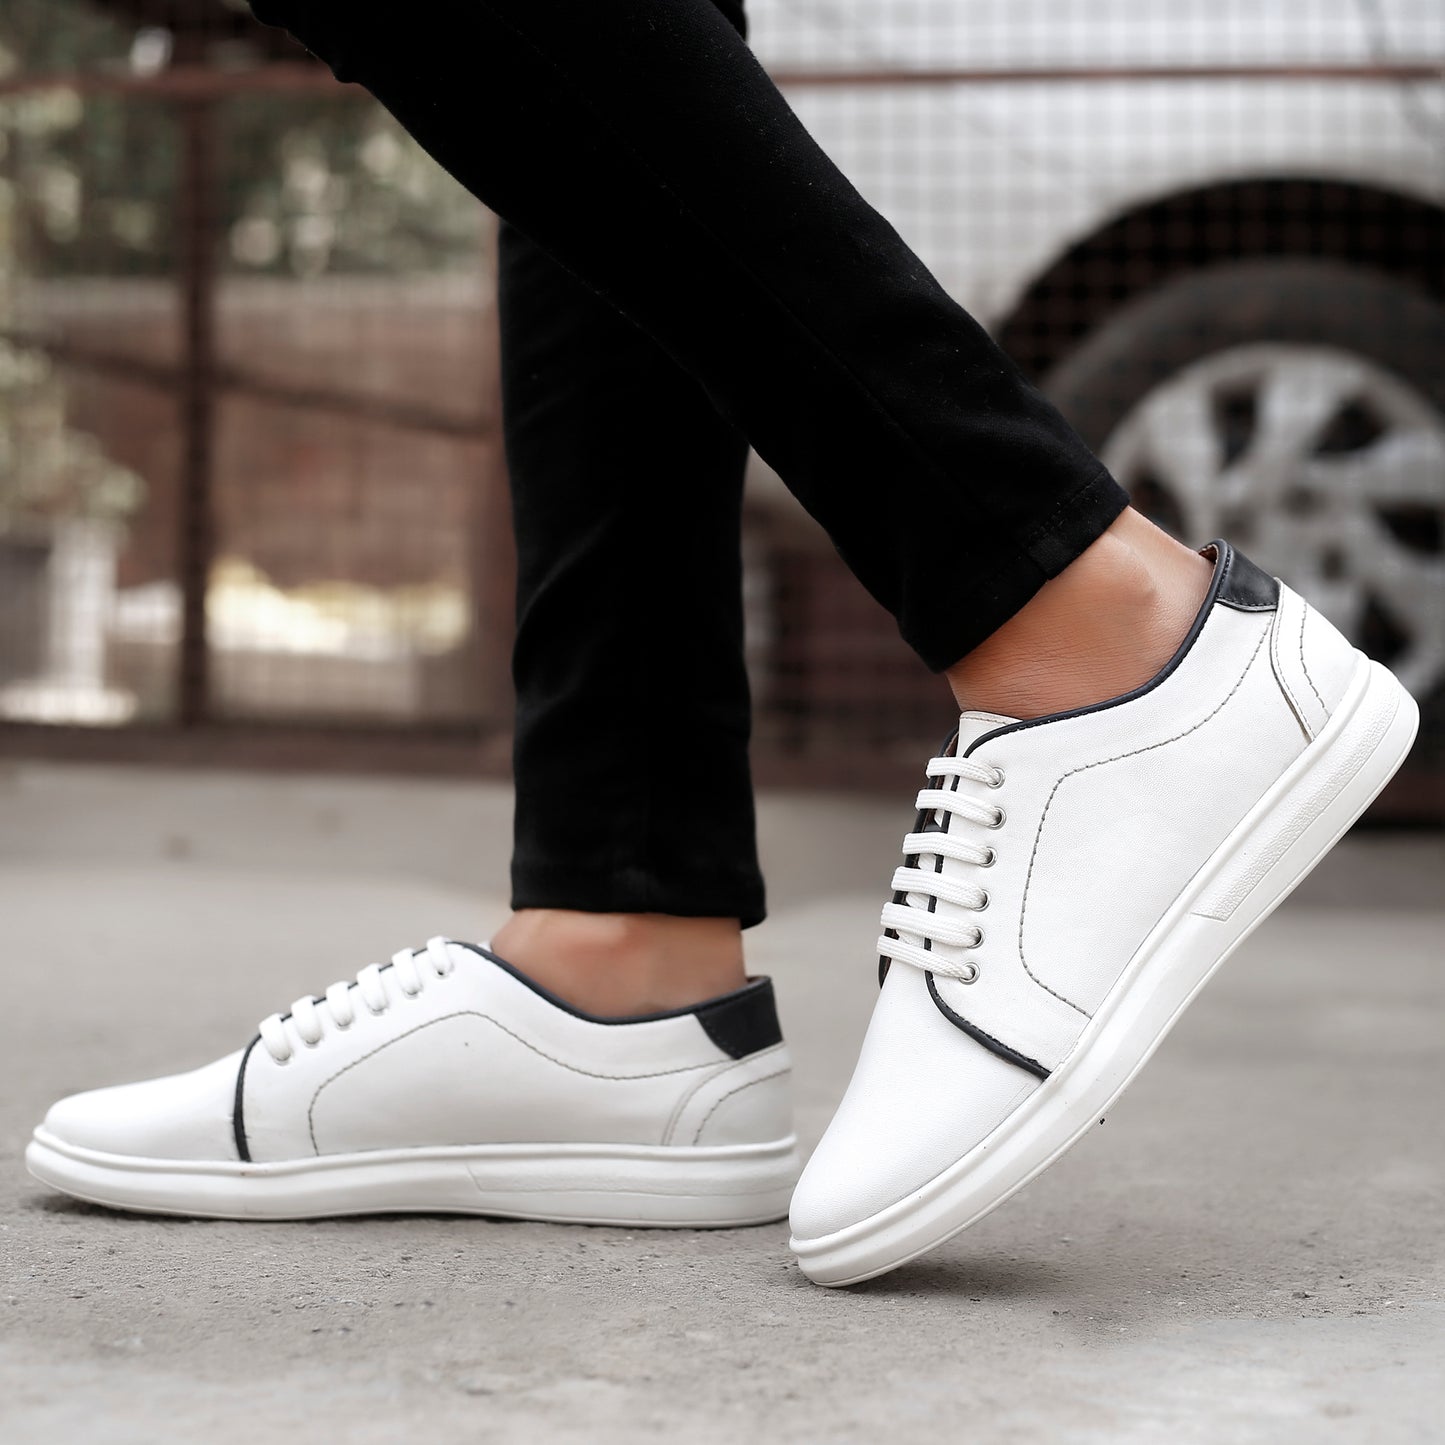 Casual Imported Synthetic Upper Material Latest Sneakers For Men